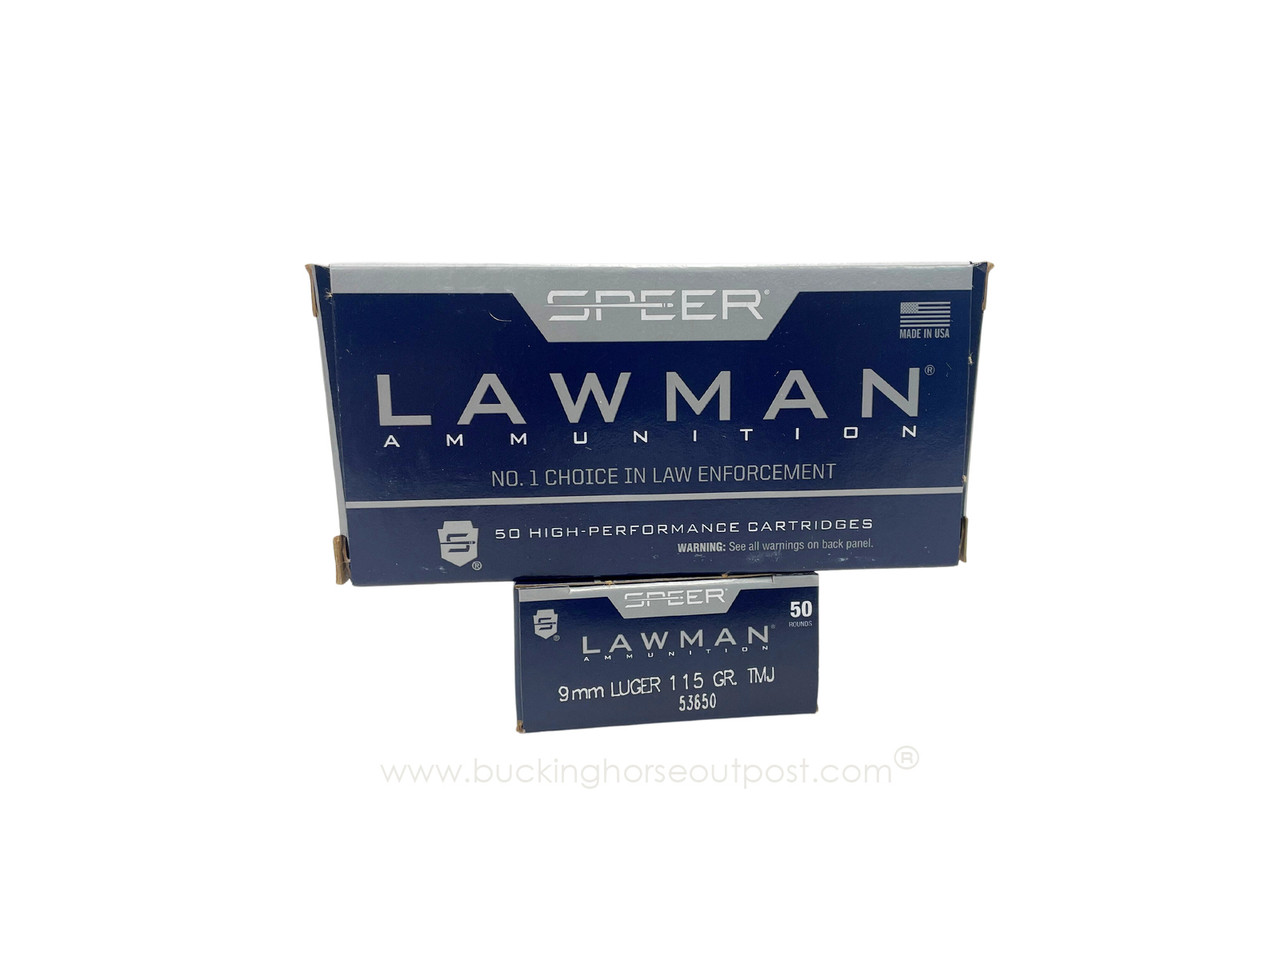 Speer Lawman 9mm 115 Grain Total Metal Jacket 50rds Per Box (53650)- FREE SHIPPING ON ORDERS OVER $175